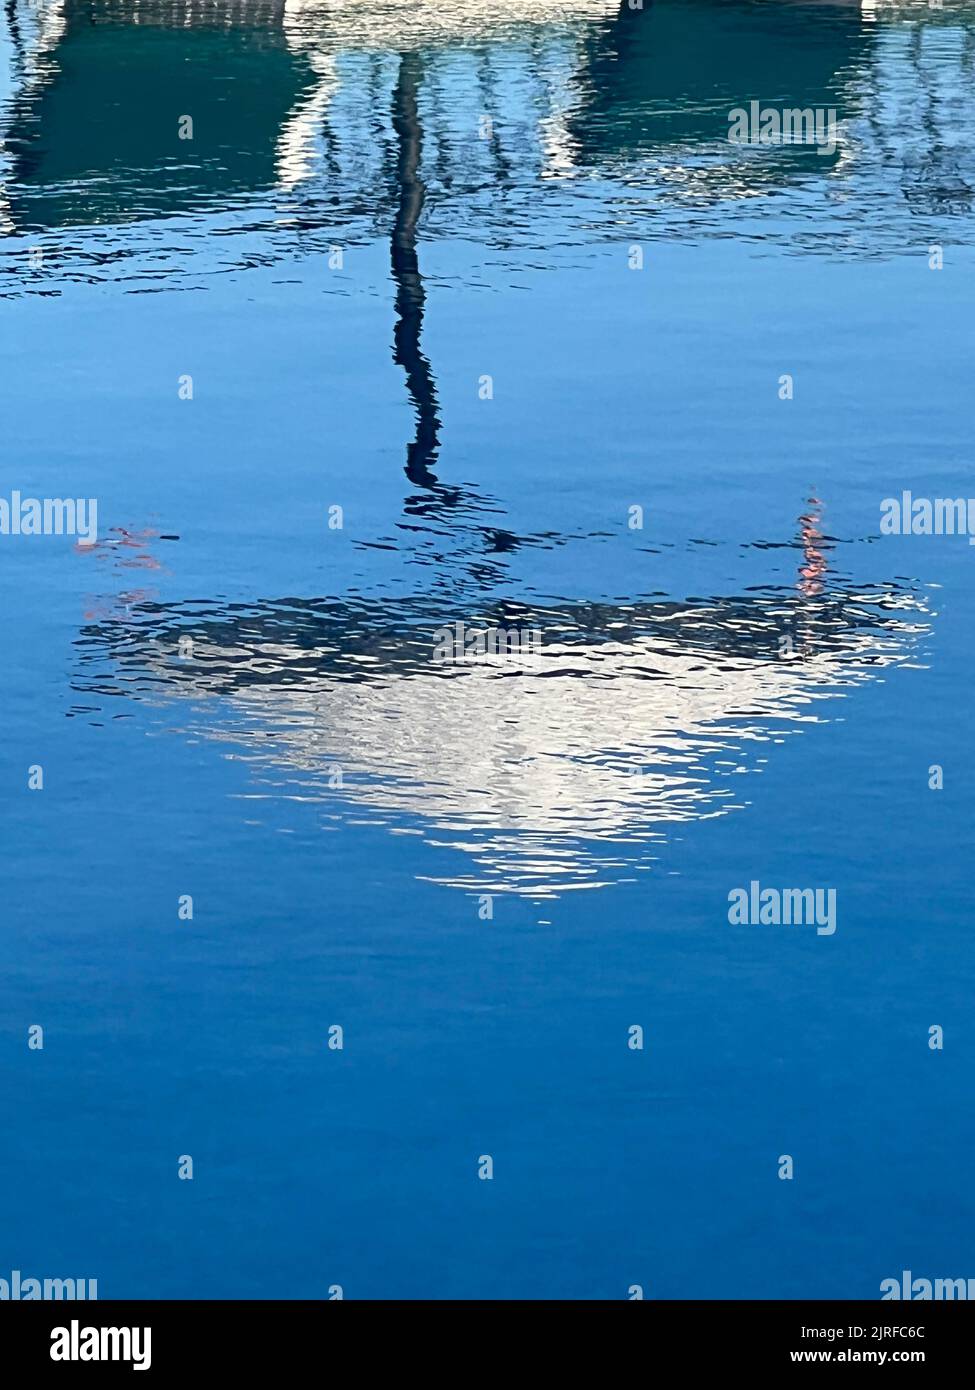 Beach umbrella reflecting on water surface. Rippled water surface. Summer vacation background with copy space. Stock Photo